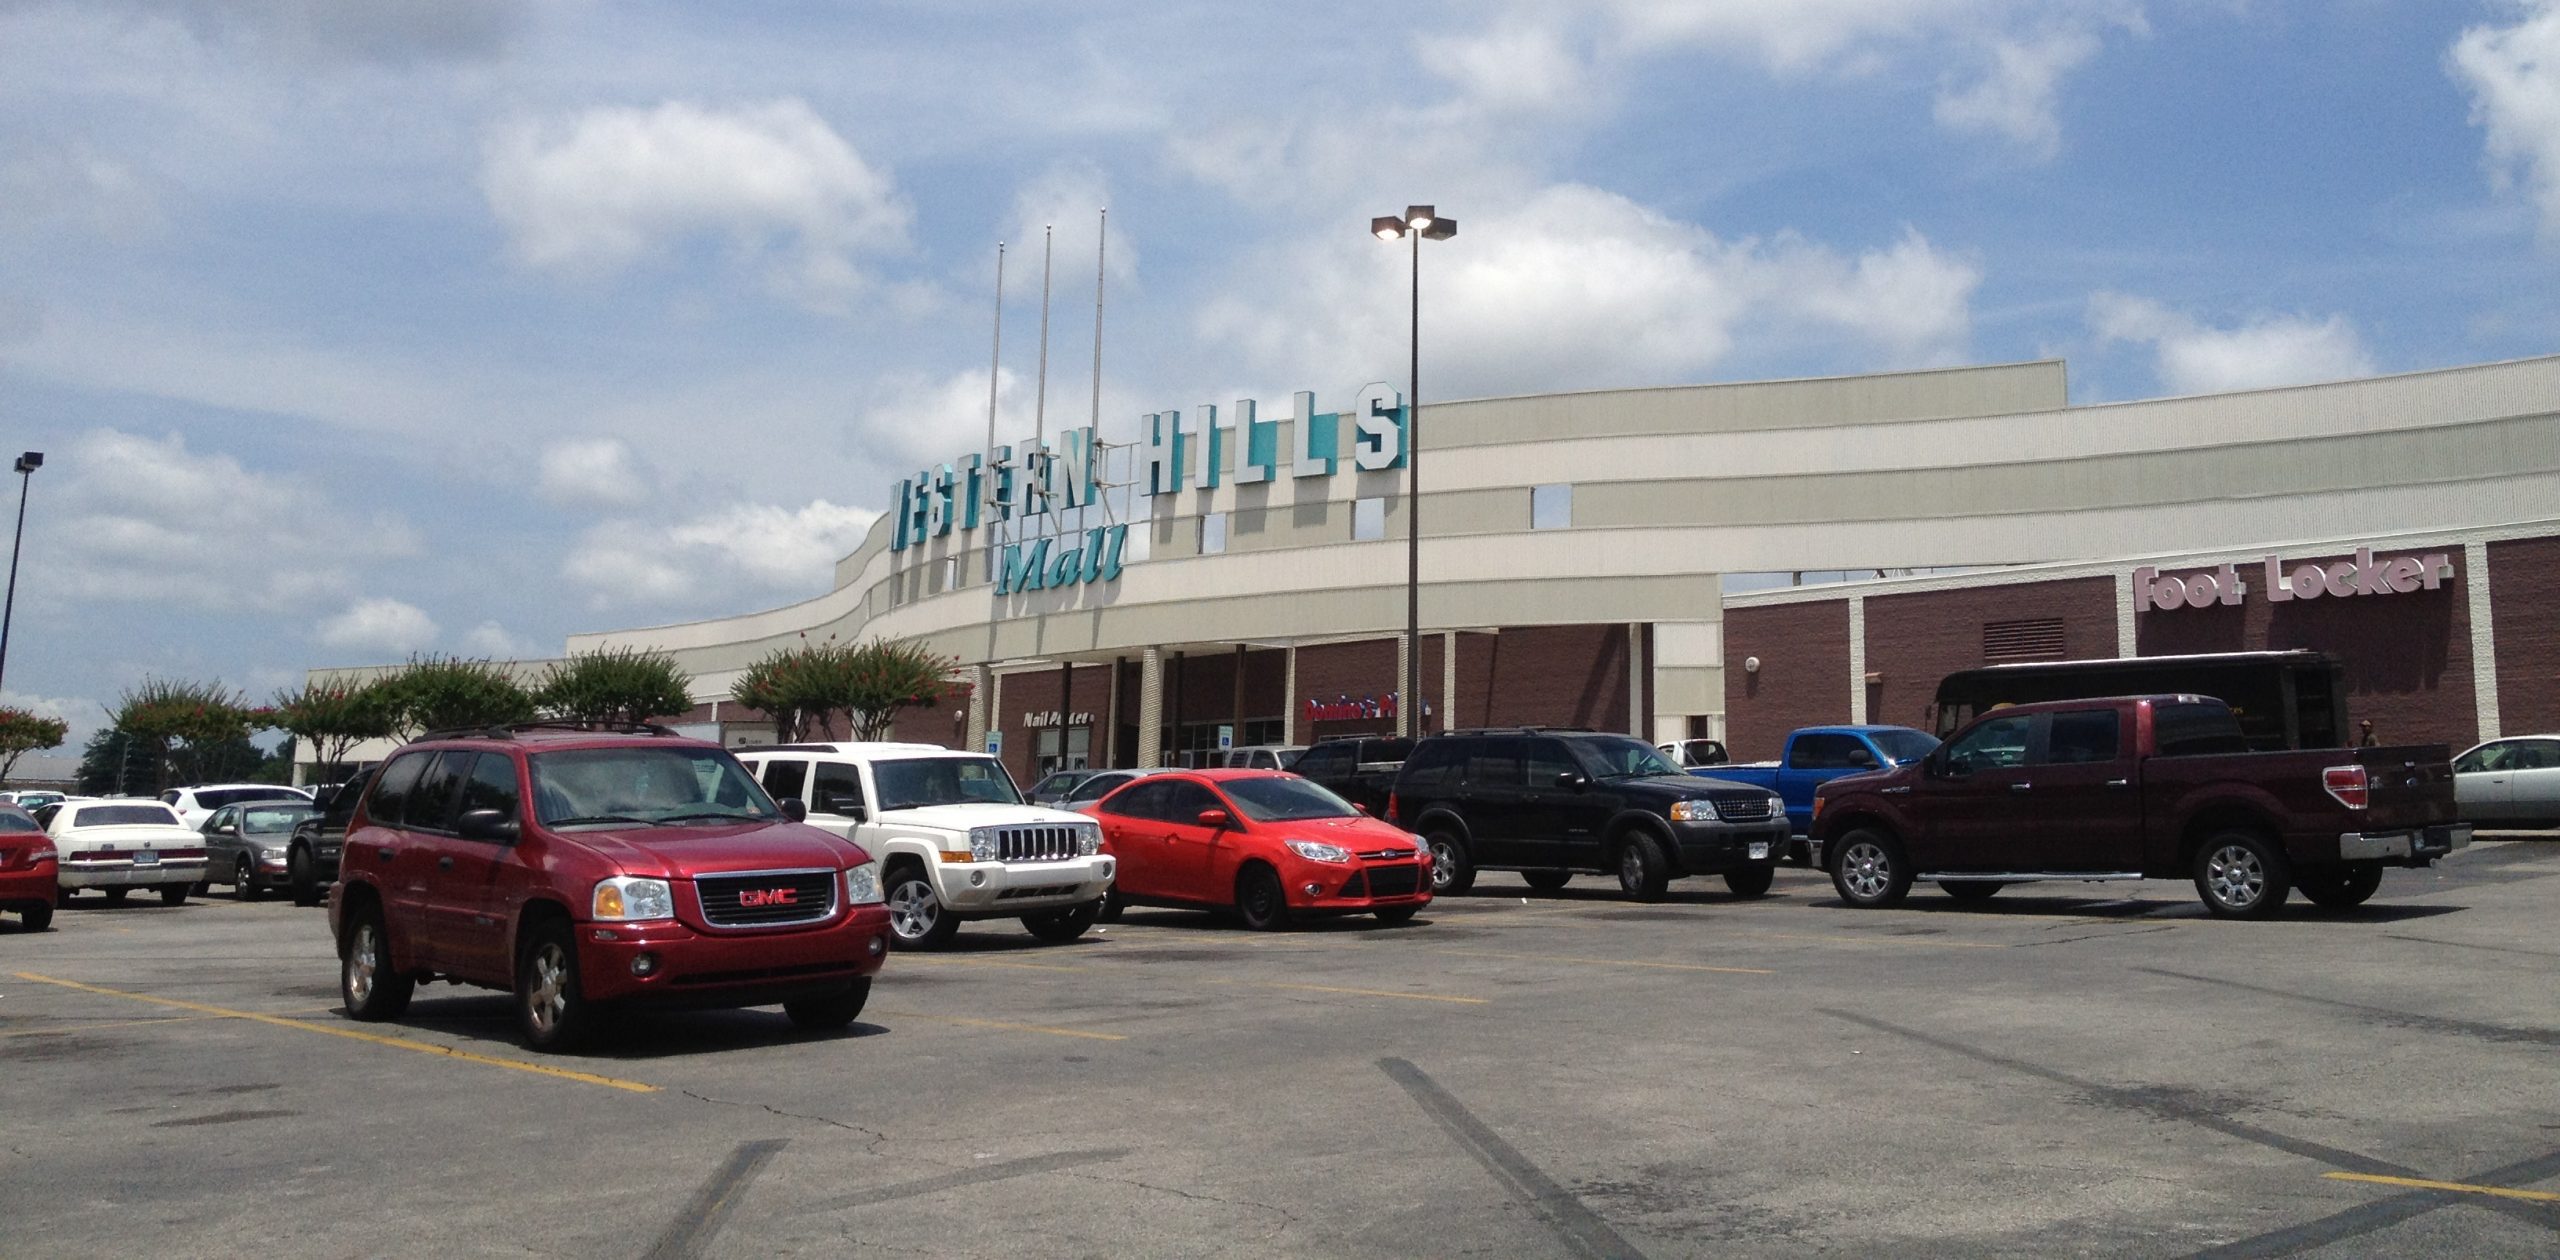 Shooting reported at Western Hills Mall